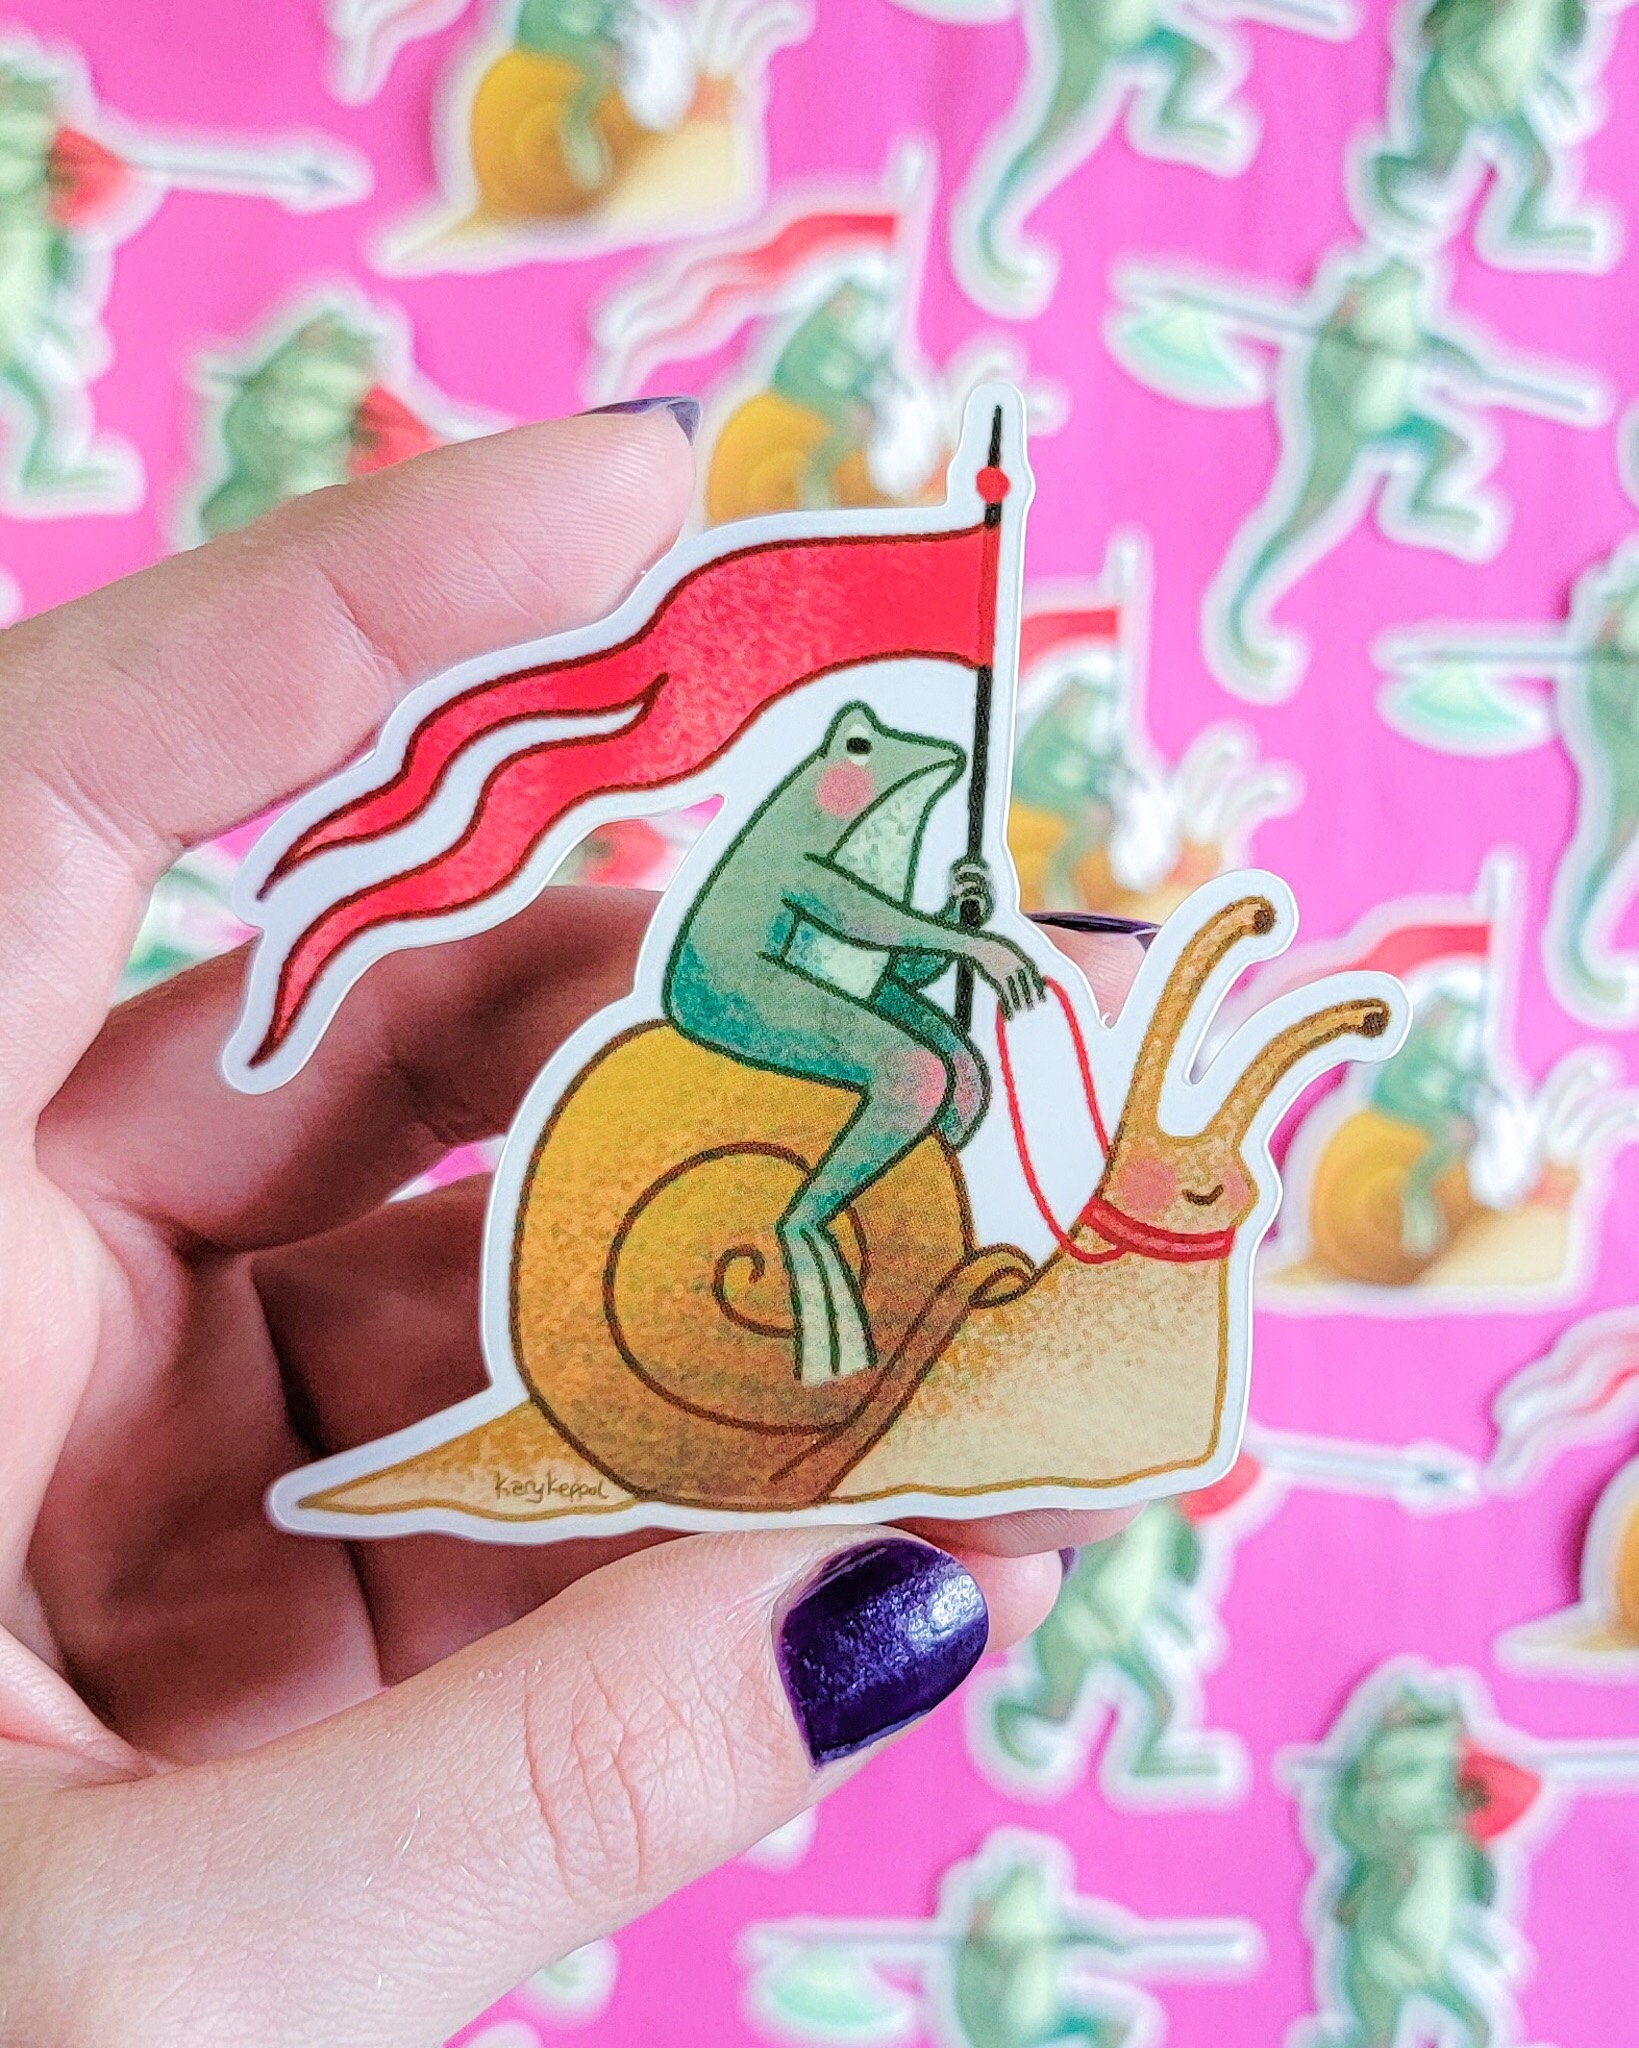 Magical Parks Snacks & Treats Stickers 